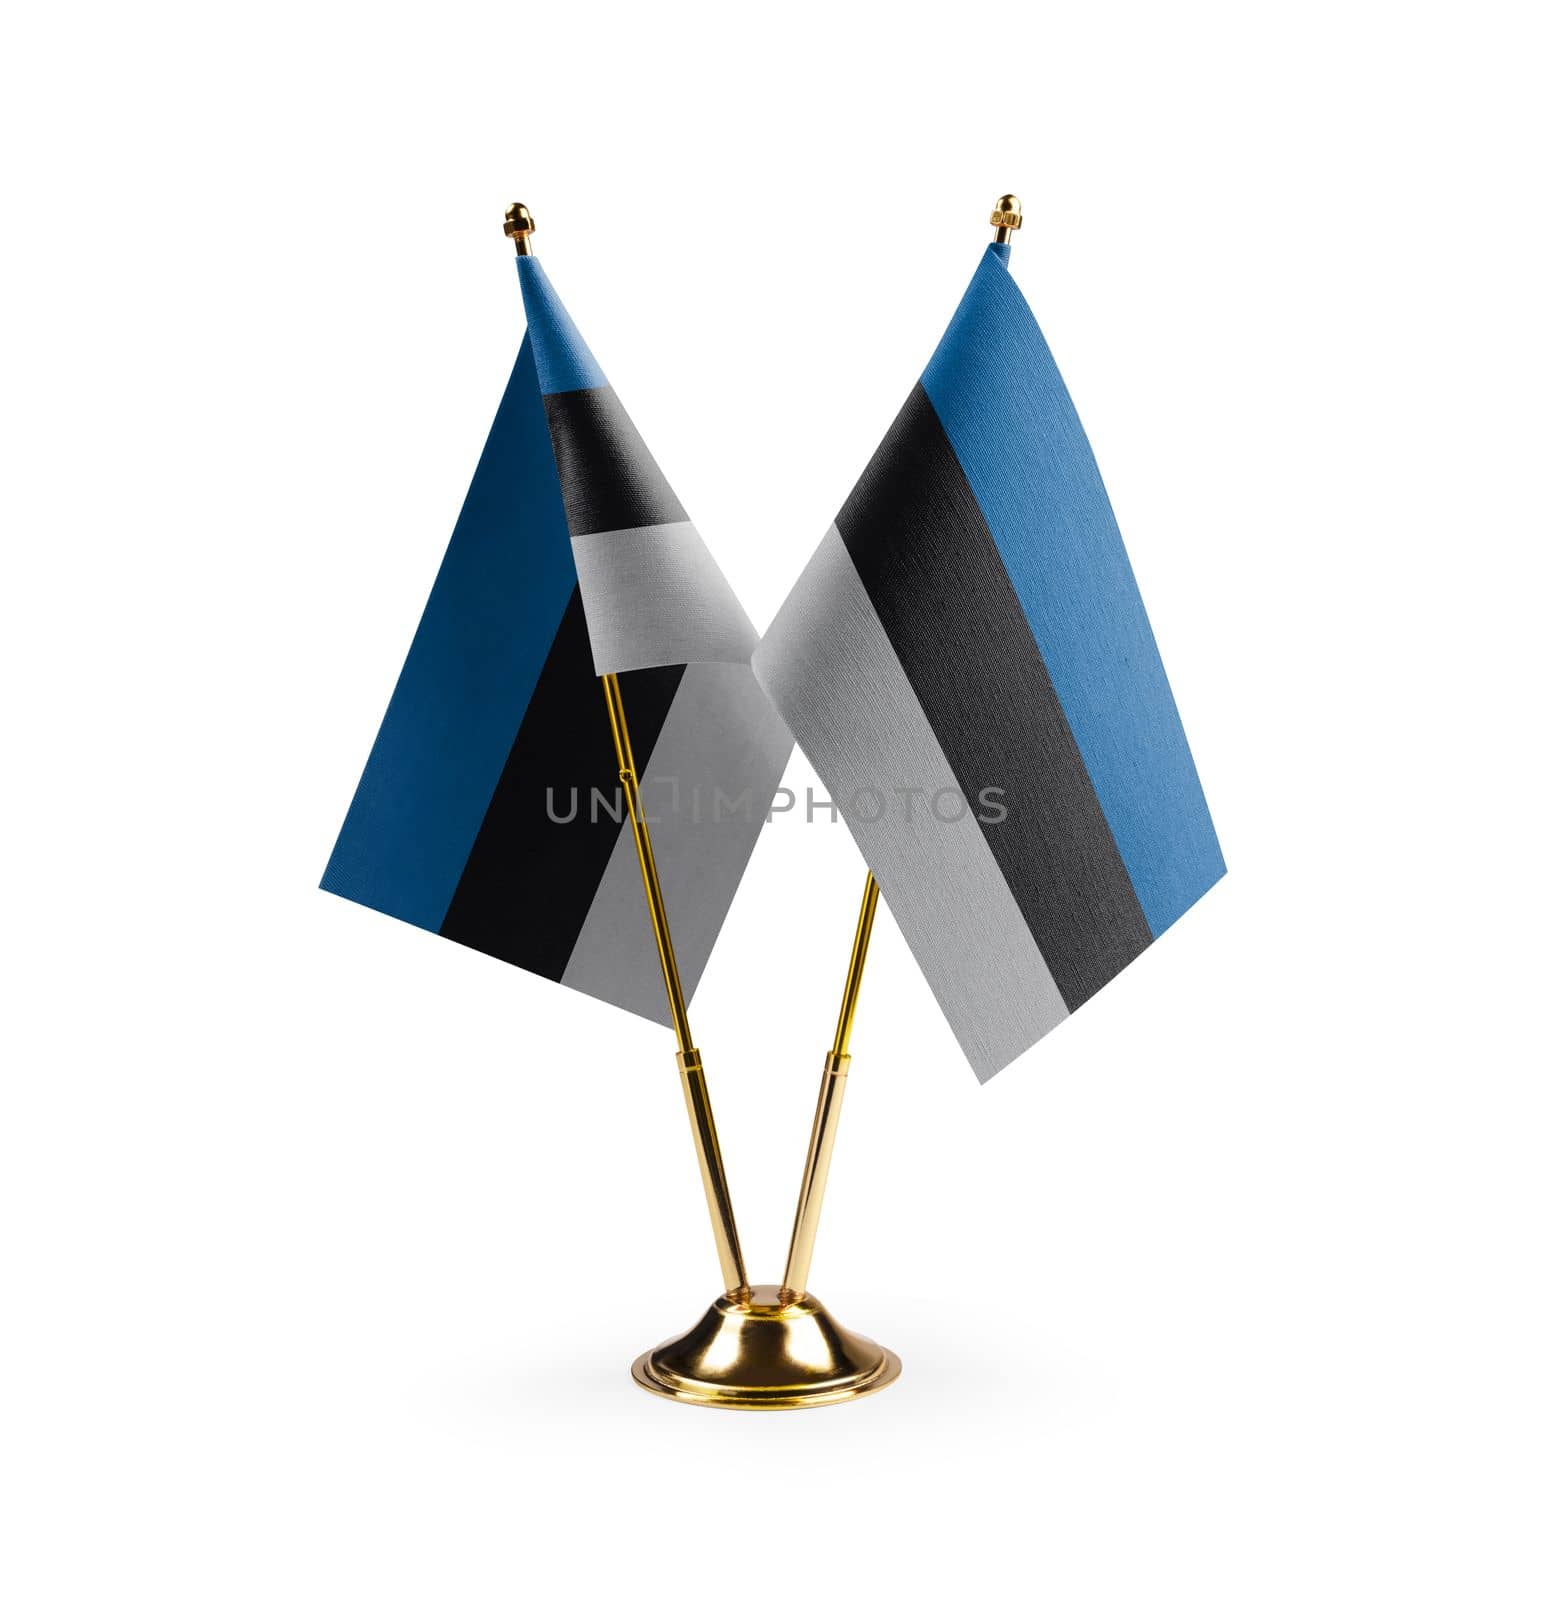 Small national flags of the Estonia on a white background by butenkow